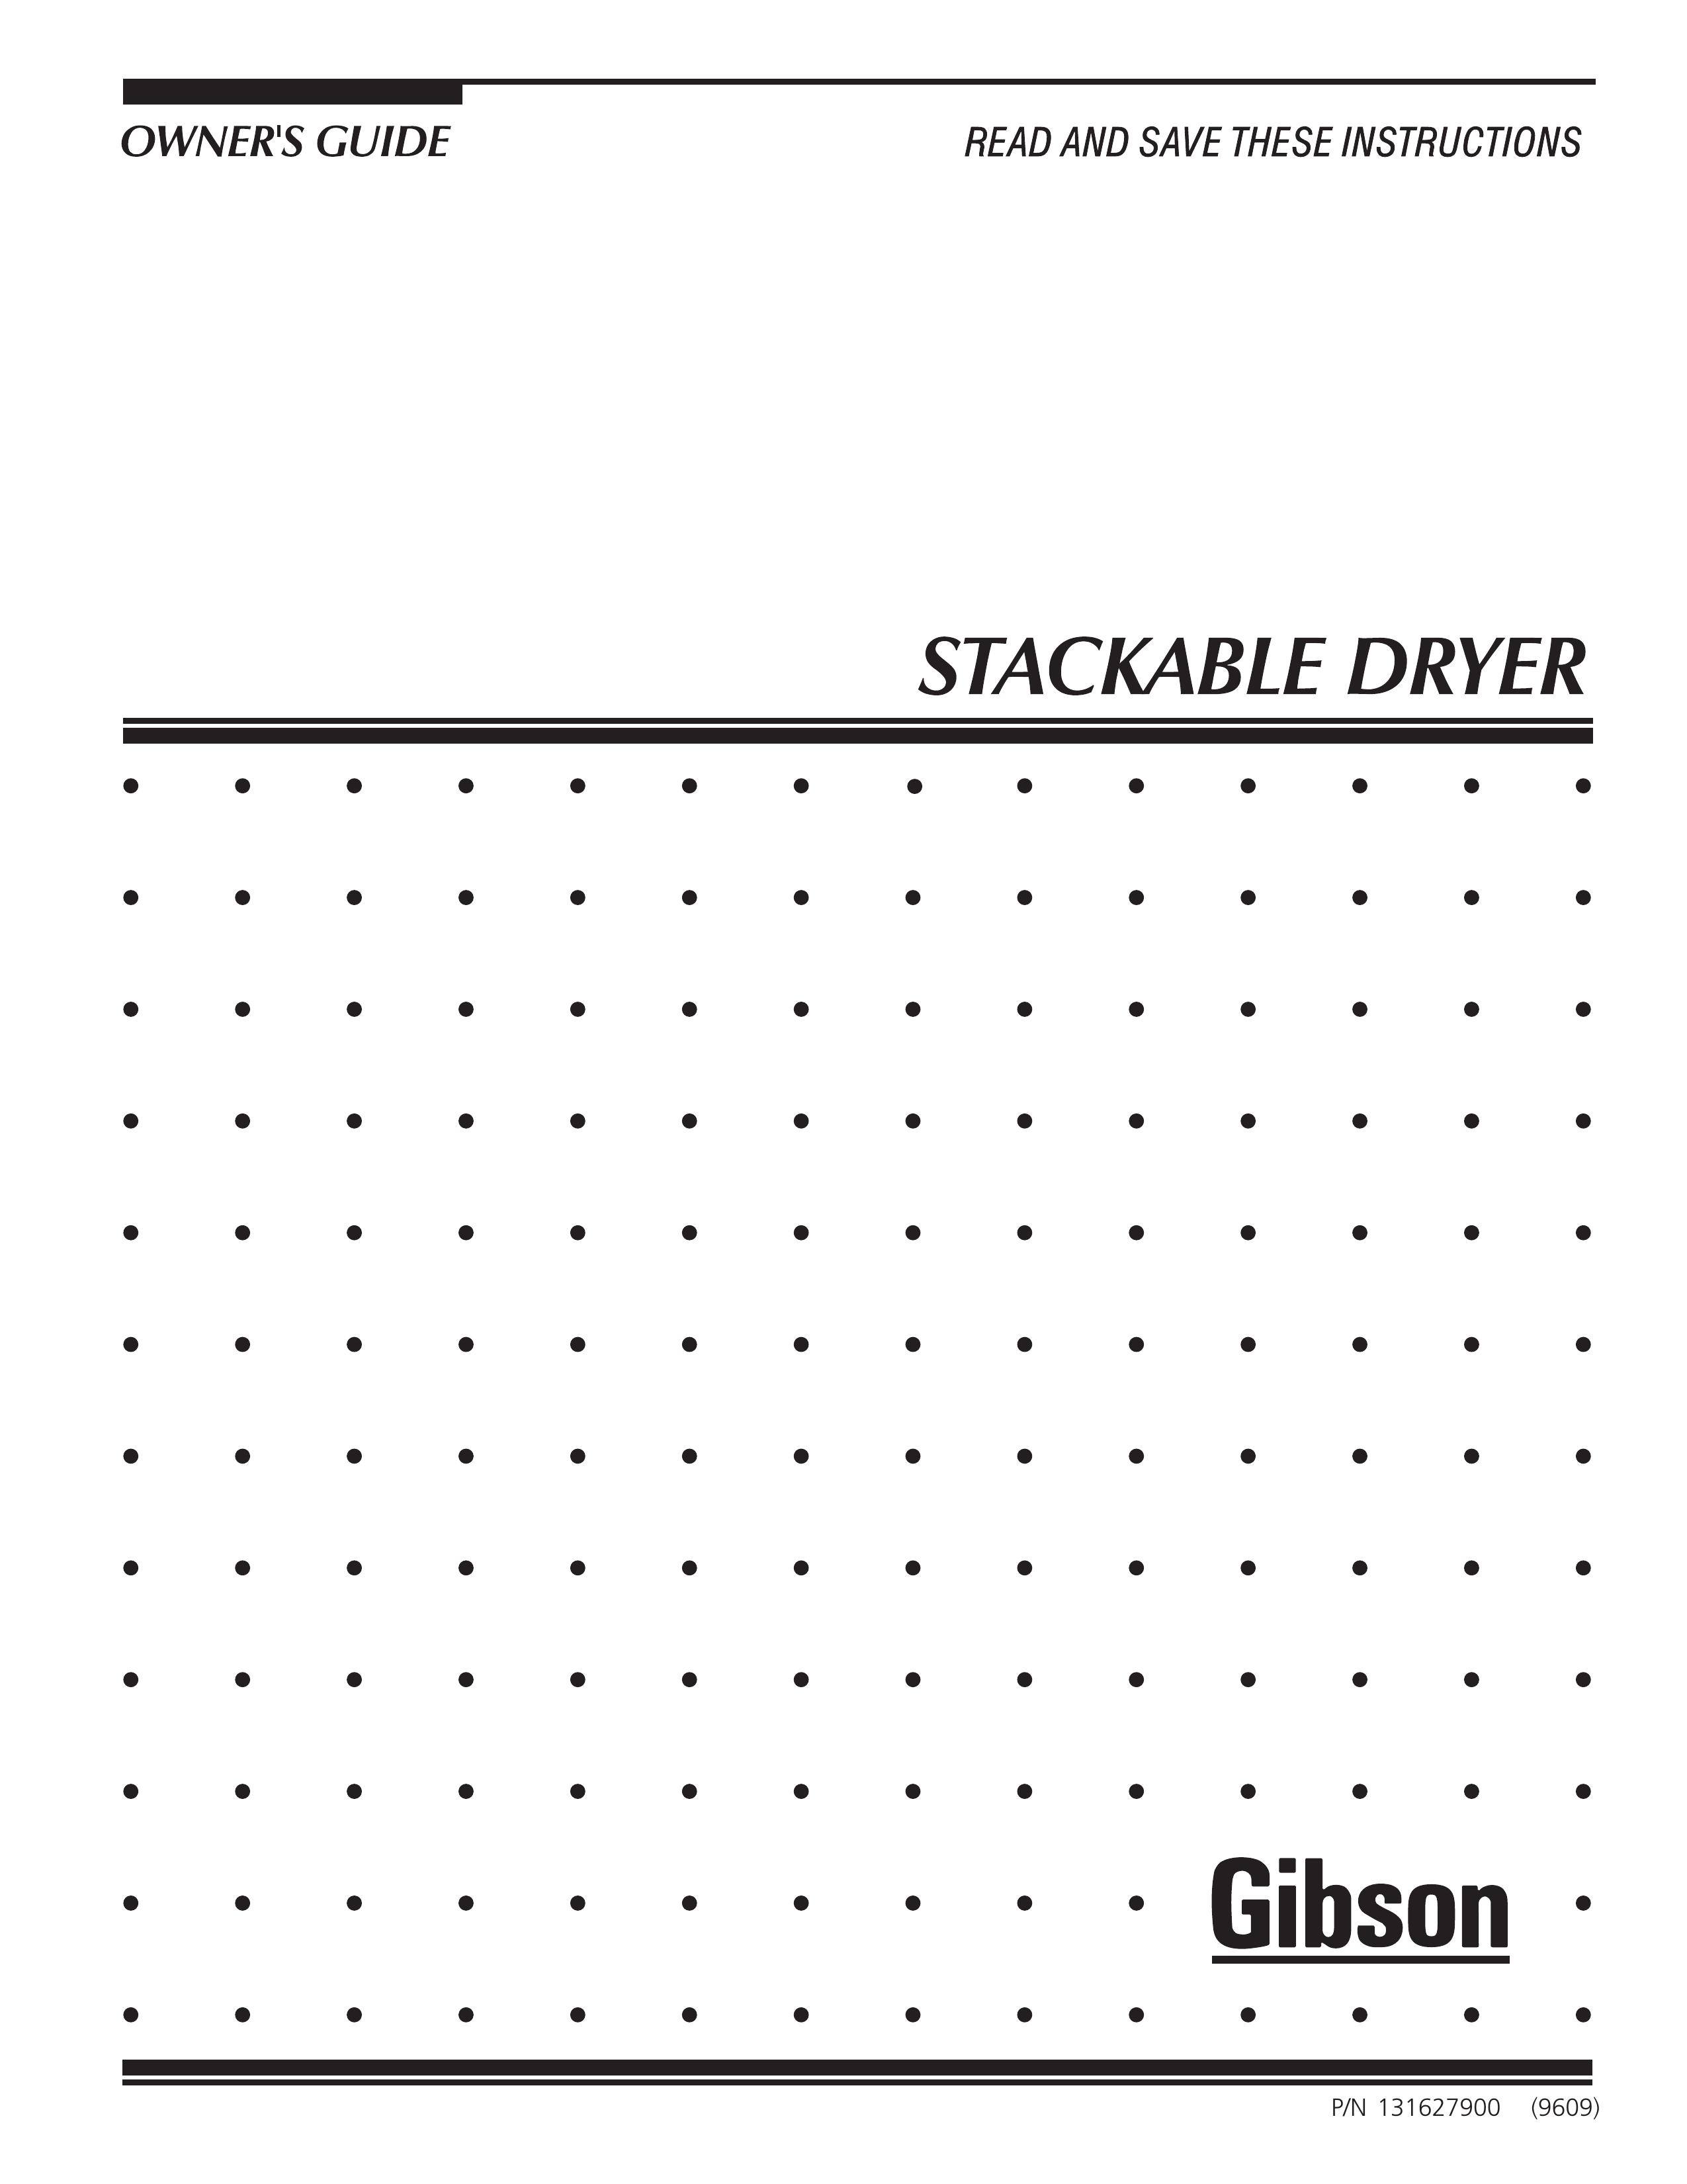 Electrolux - Gibson 131627900 Clothes Dryer User Manual